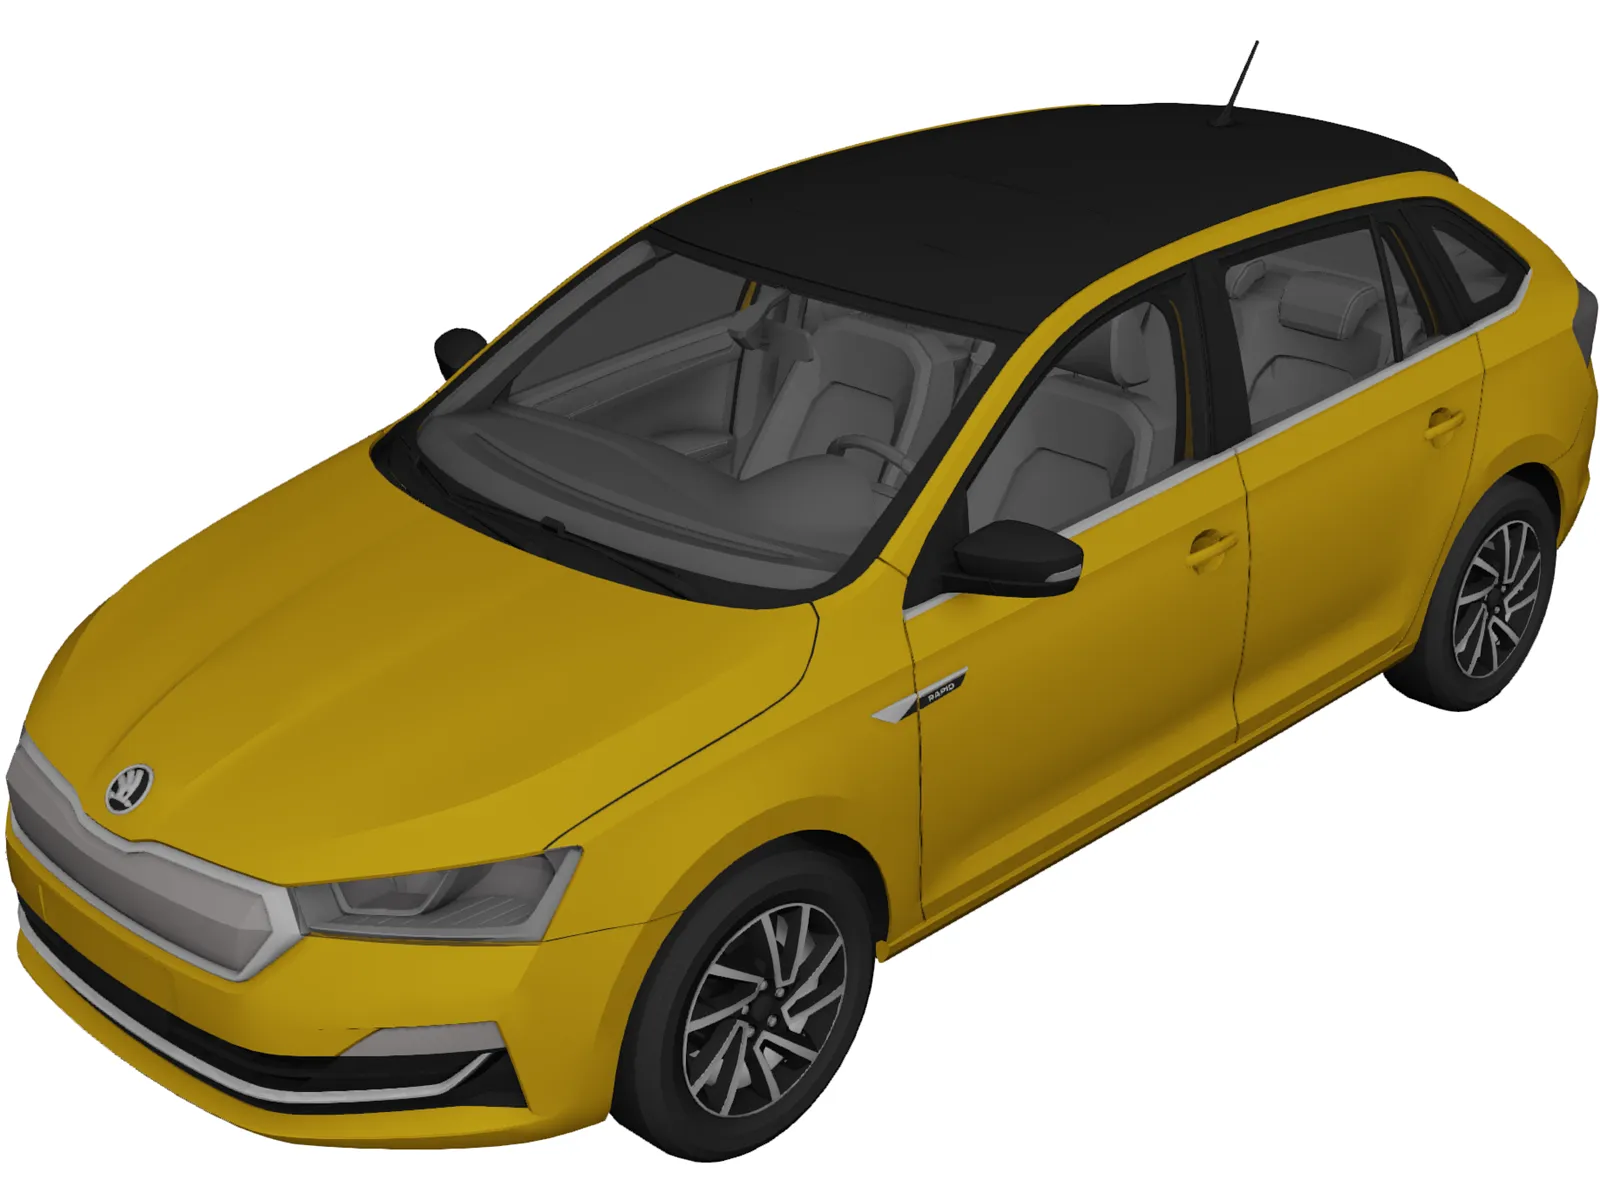 73 Skoda Rapid Spaceback Images, Stock Photos, 3D objects